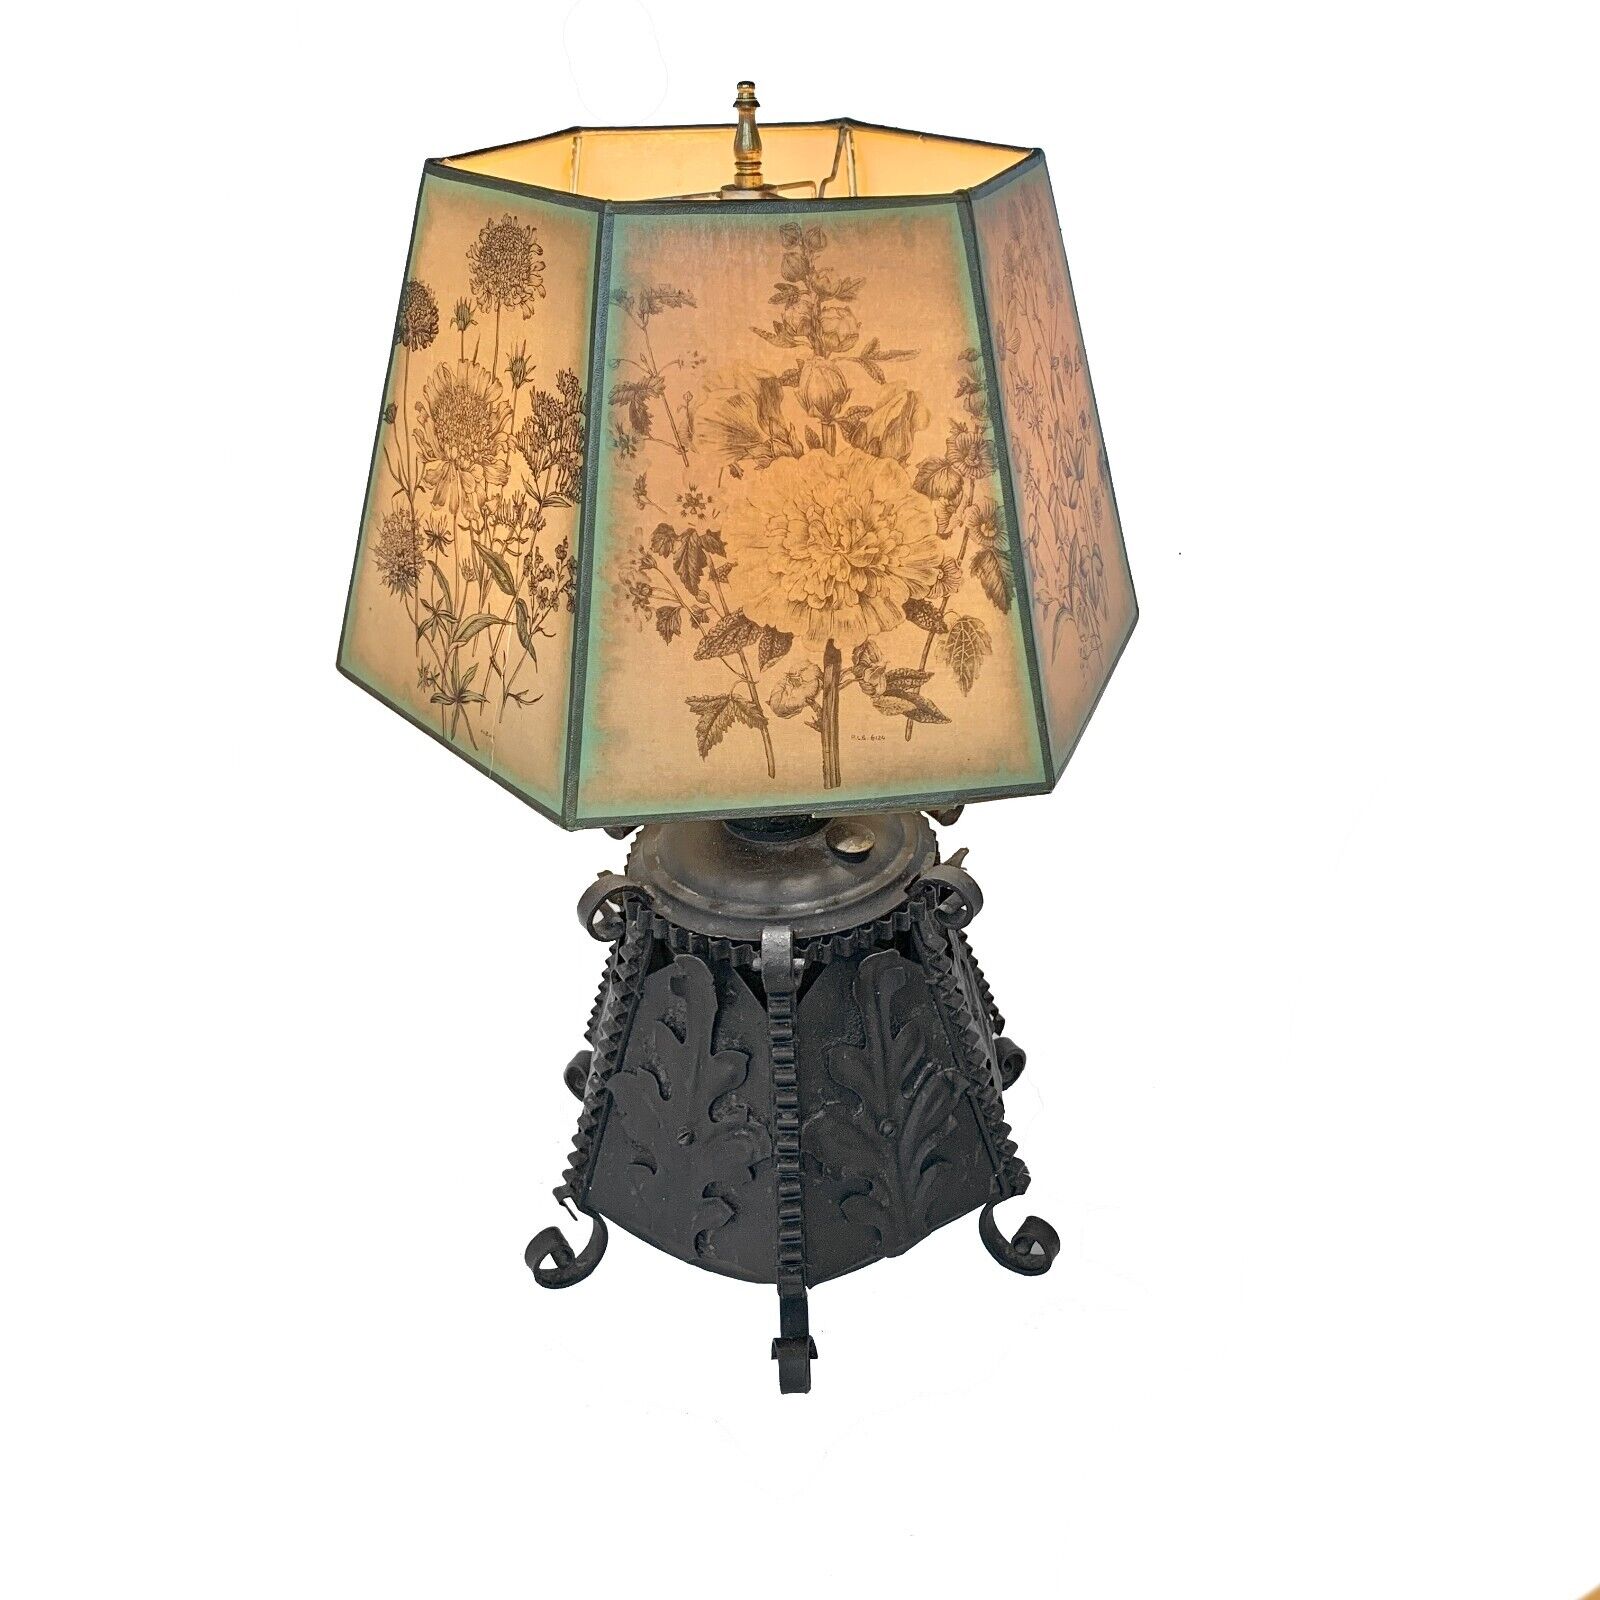 Antique Arts and Crafts Table Lamp Electrified Six Sided Floral Botanical Shade